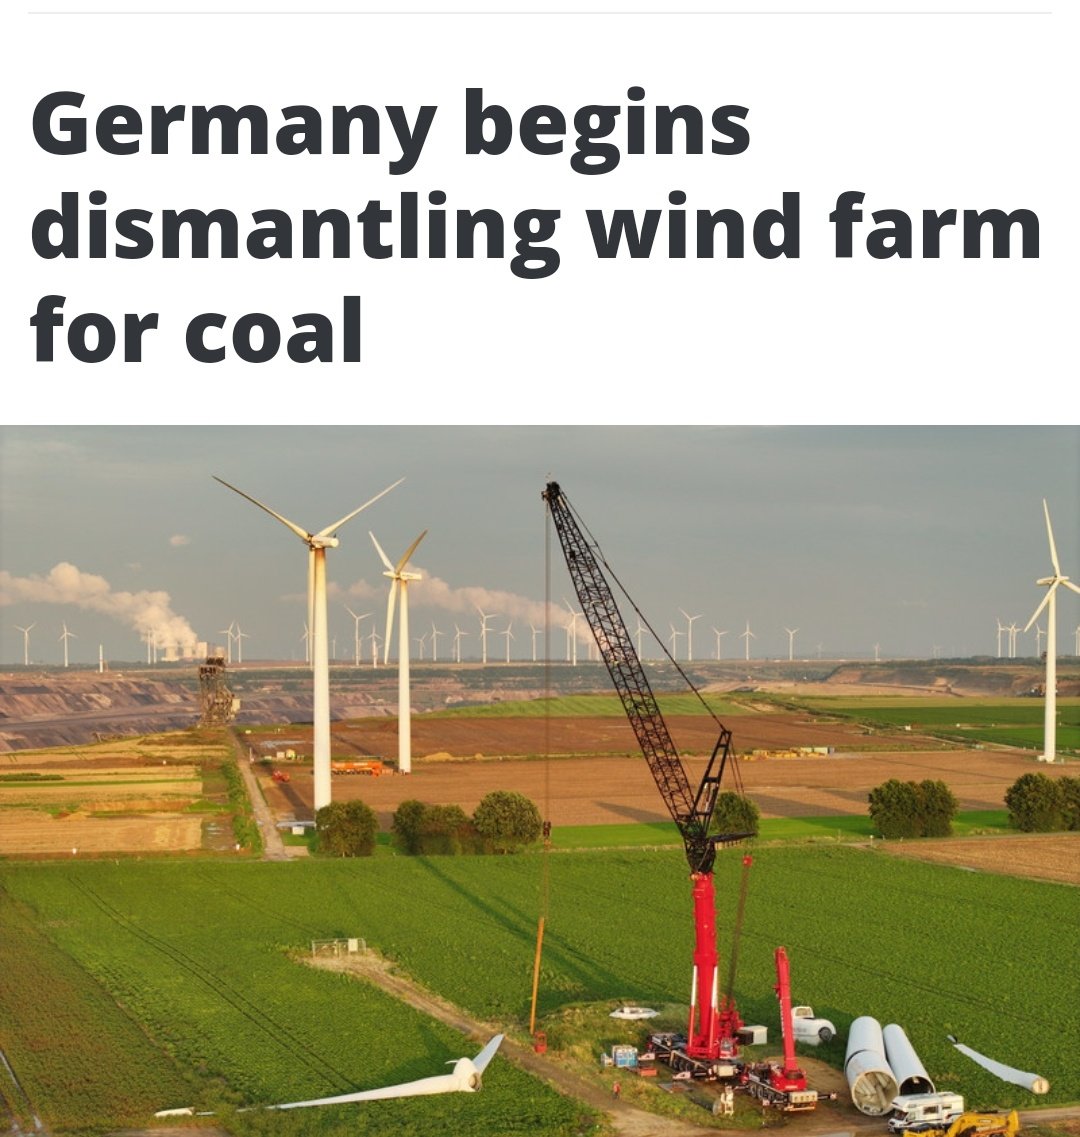 “German energy giant RWE has begun dismantling a wind farm to make way for a further expansion of an open-pit lignite coal mine in the western region of North Rhine Westphalia” 🤡